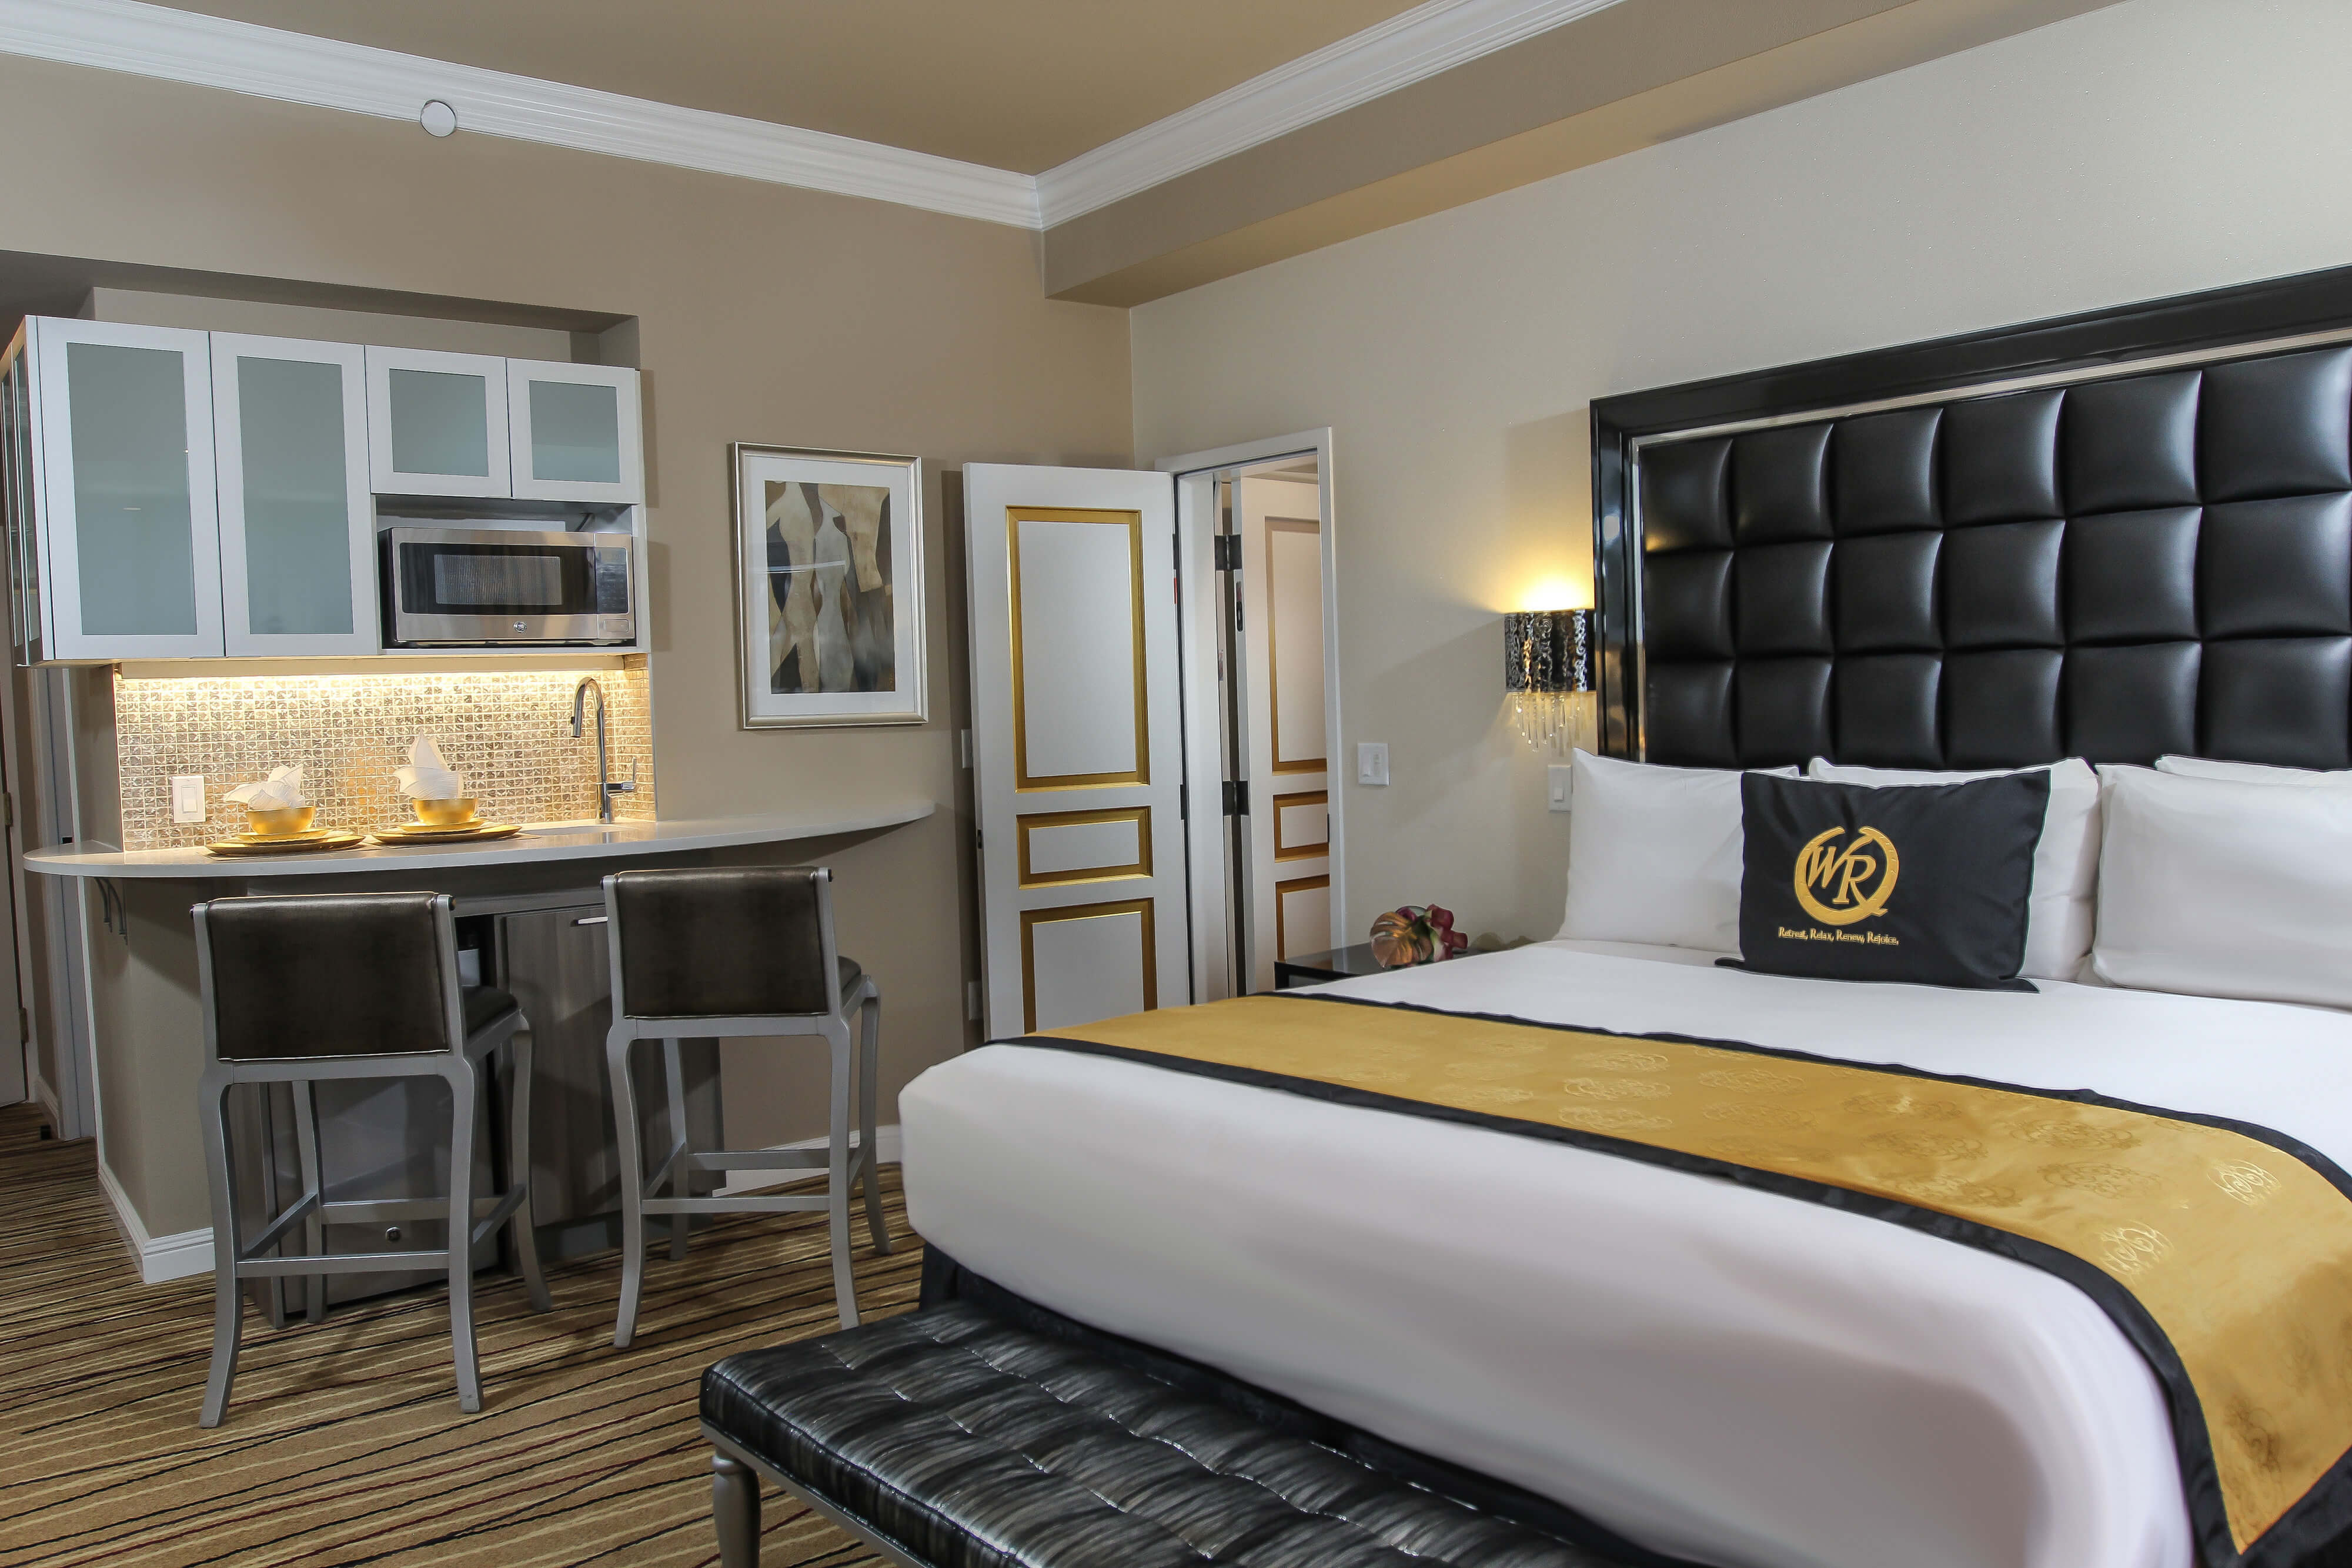 Westgate Hotel In Las Vegas Offers Spacious Accommodations